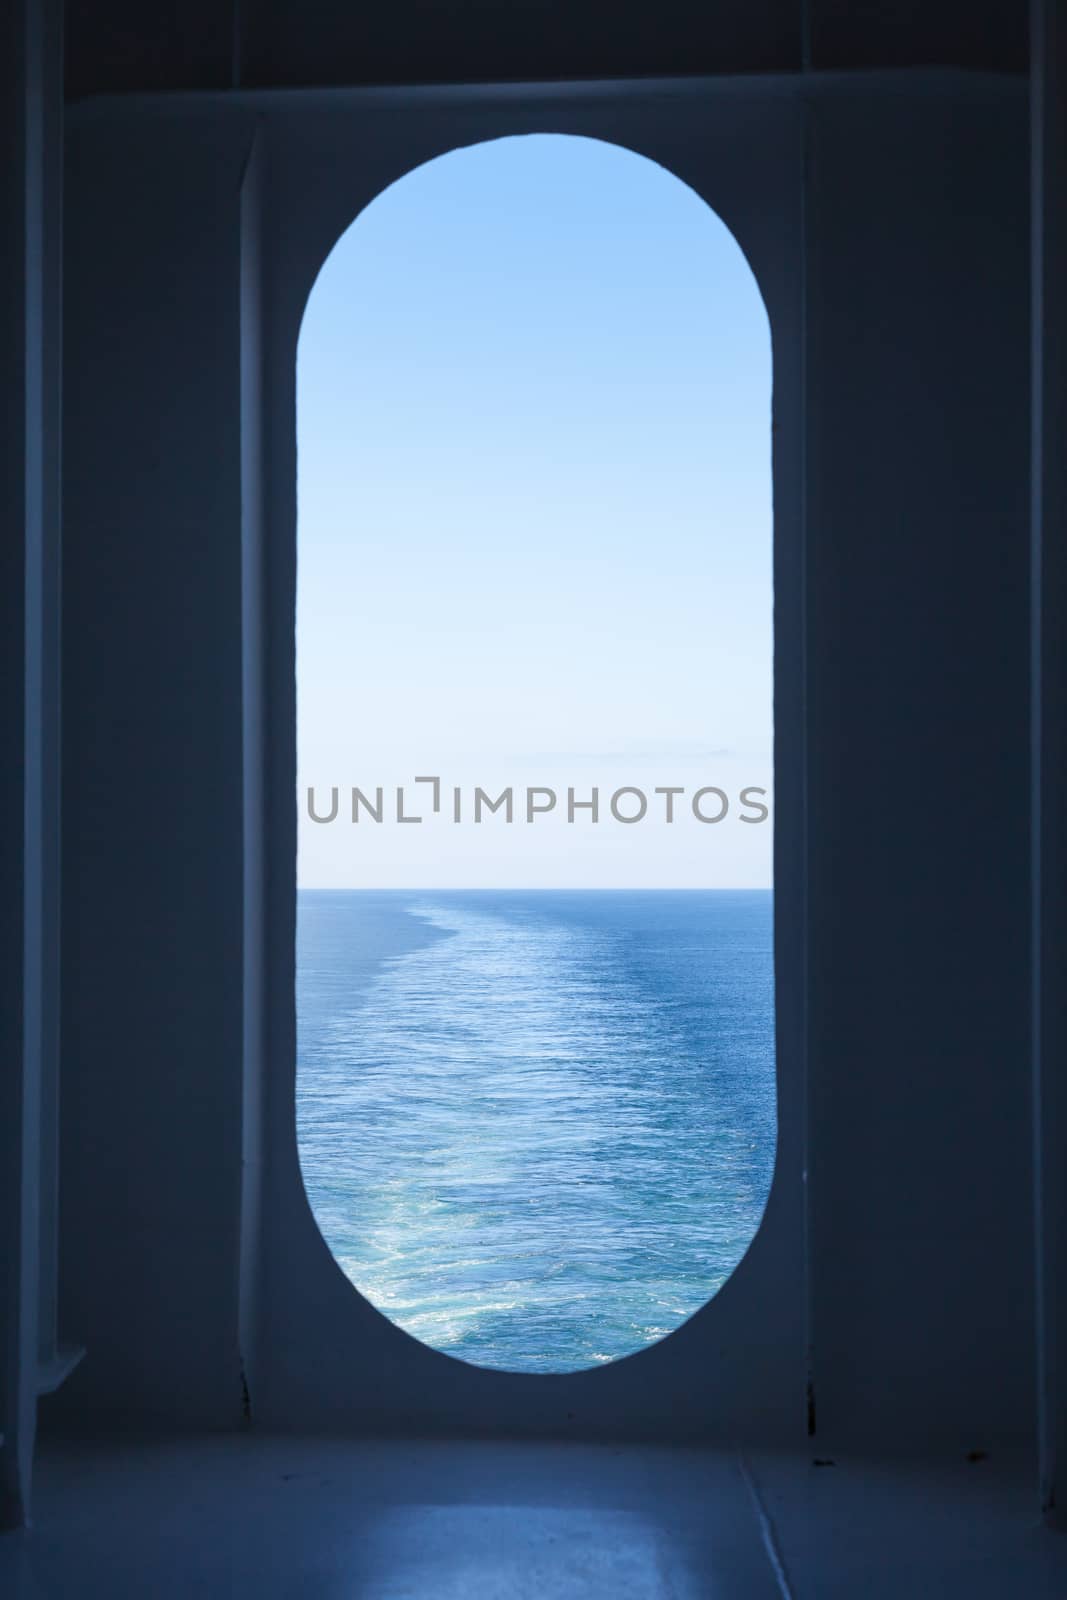 The view from a ship's stern as it travels across the ocean.